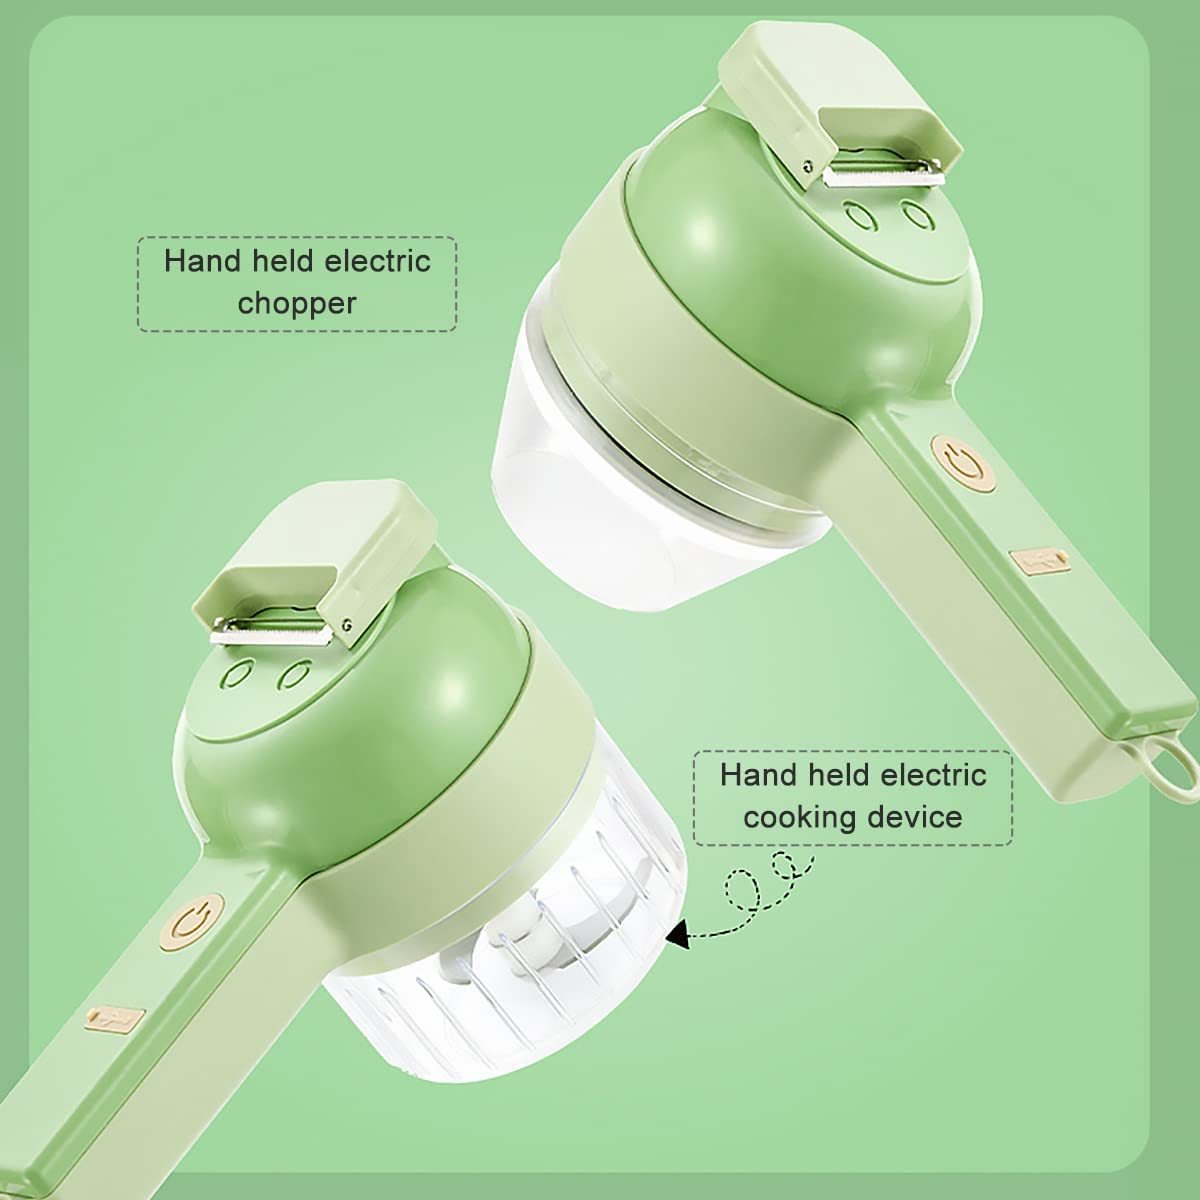 Vegetable Chopper 4 in 1 Handheld Electric Food Chopper Set Wireless  Vegetable Cutter Set with USB Powered for Garlic Chili Onion Celery Ginger  Meat